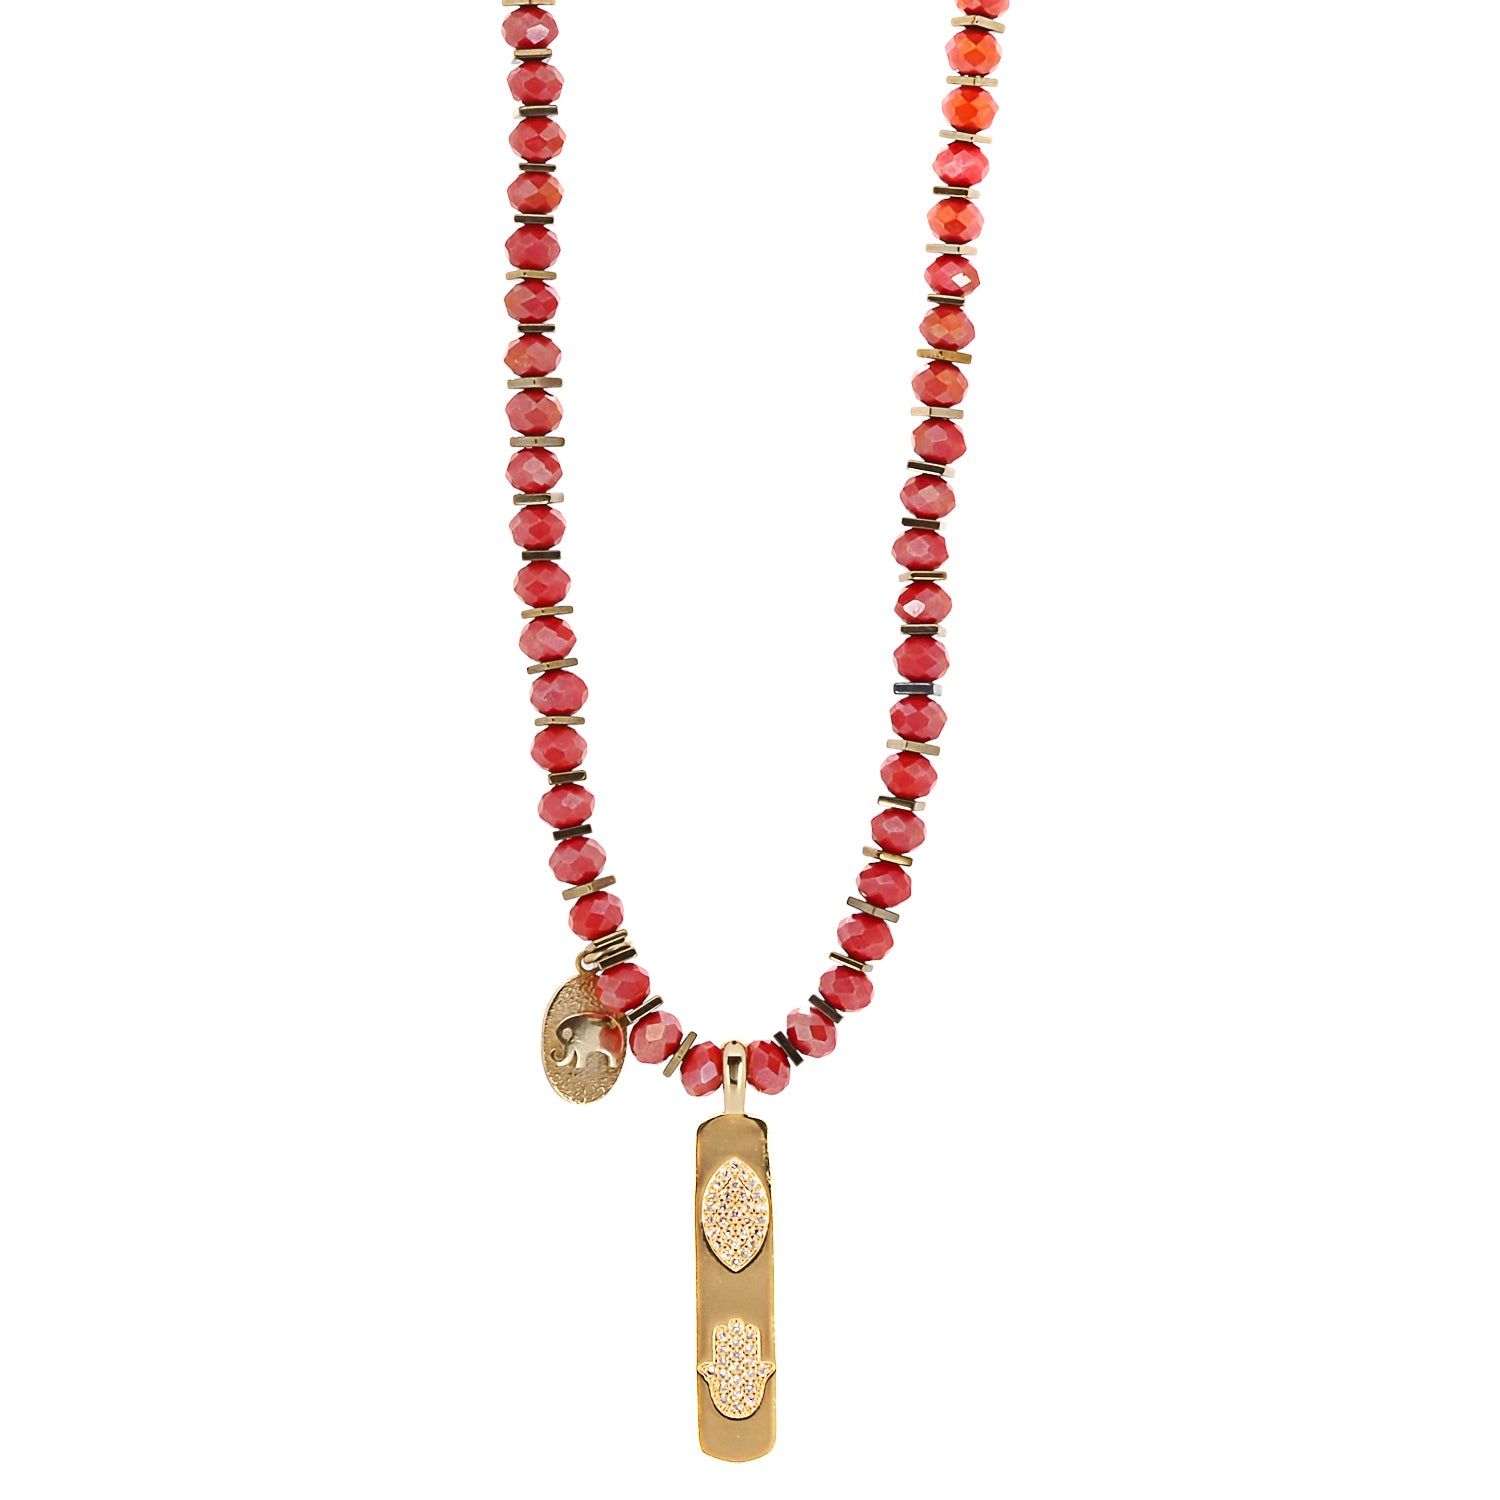 Summer Journey Necklace with vibrant orange crystal beads and an 18K gold plated Hamsa pendant